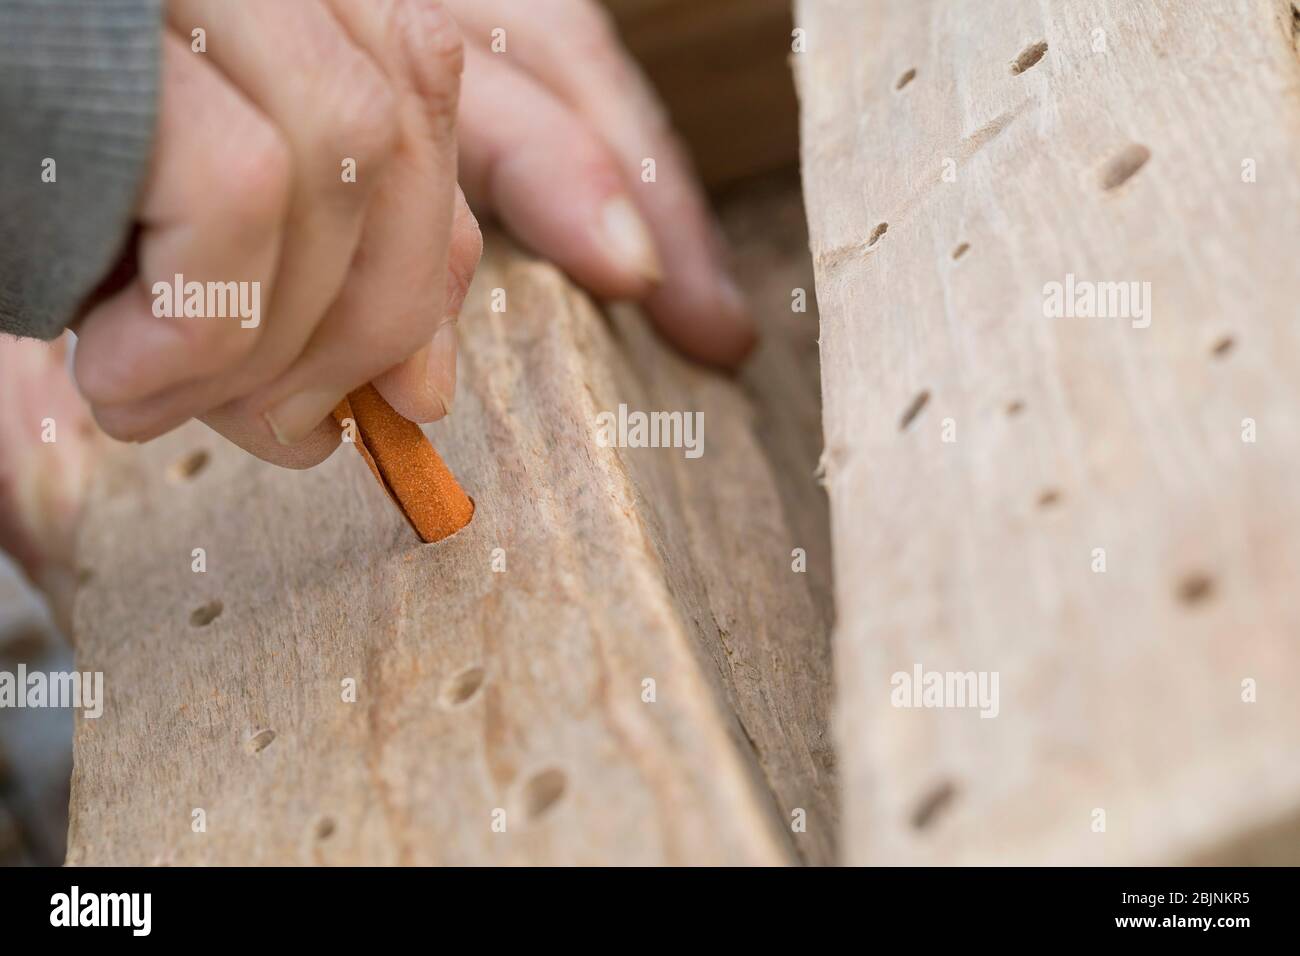 nesting aid for wild bees, smoothing holes in hardwood with emery paper Stock Photo